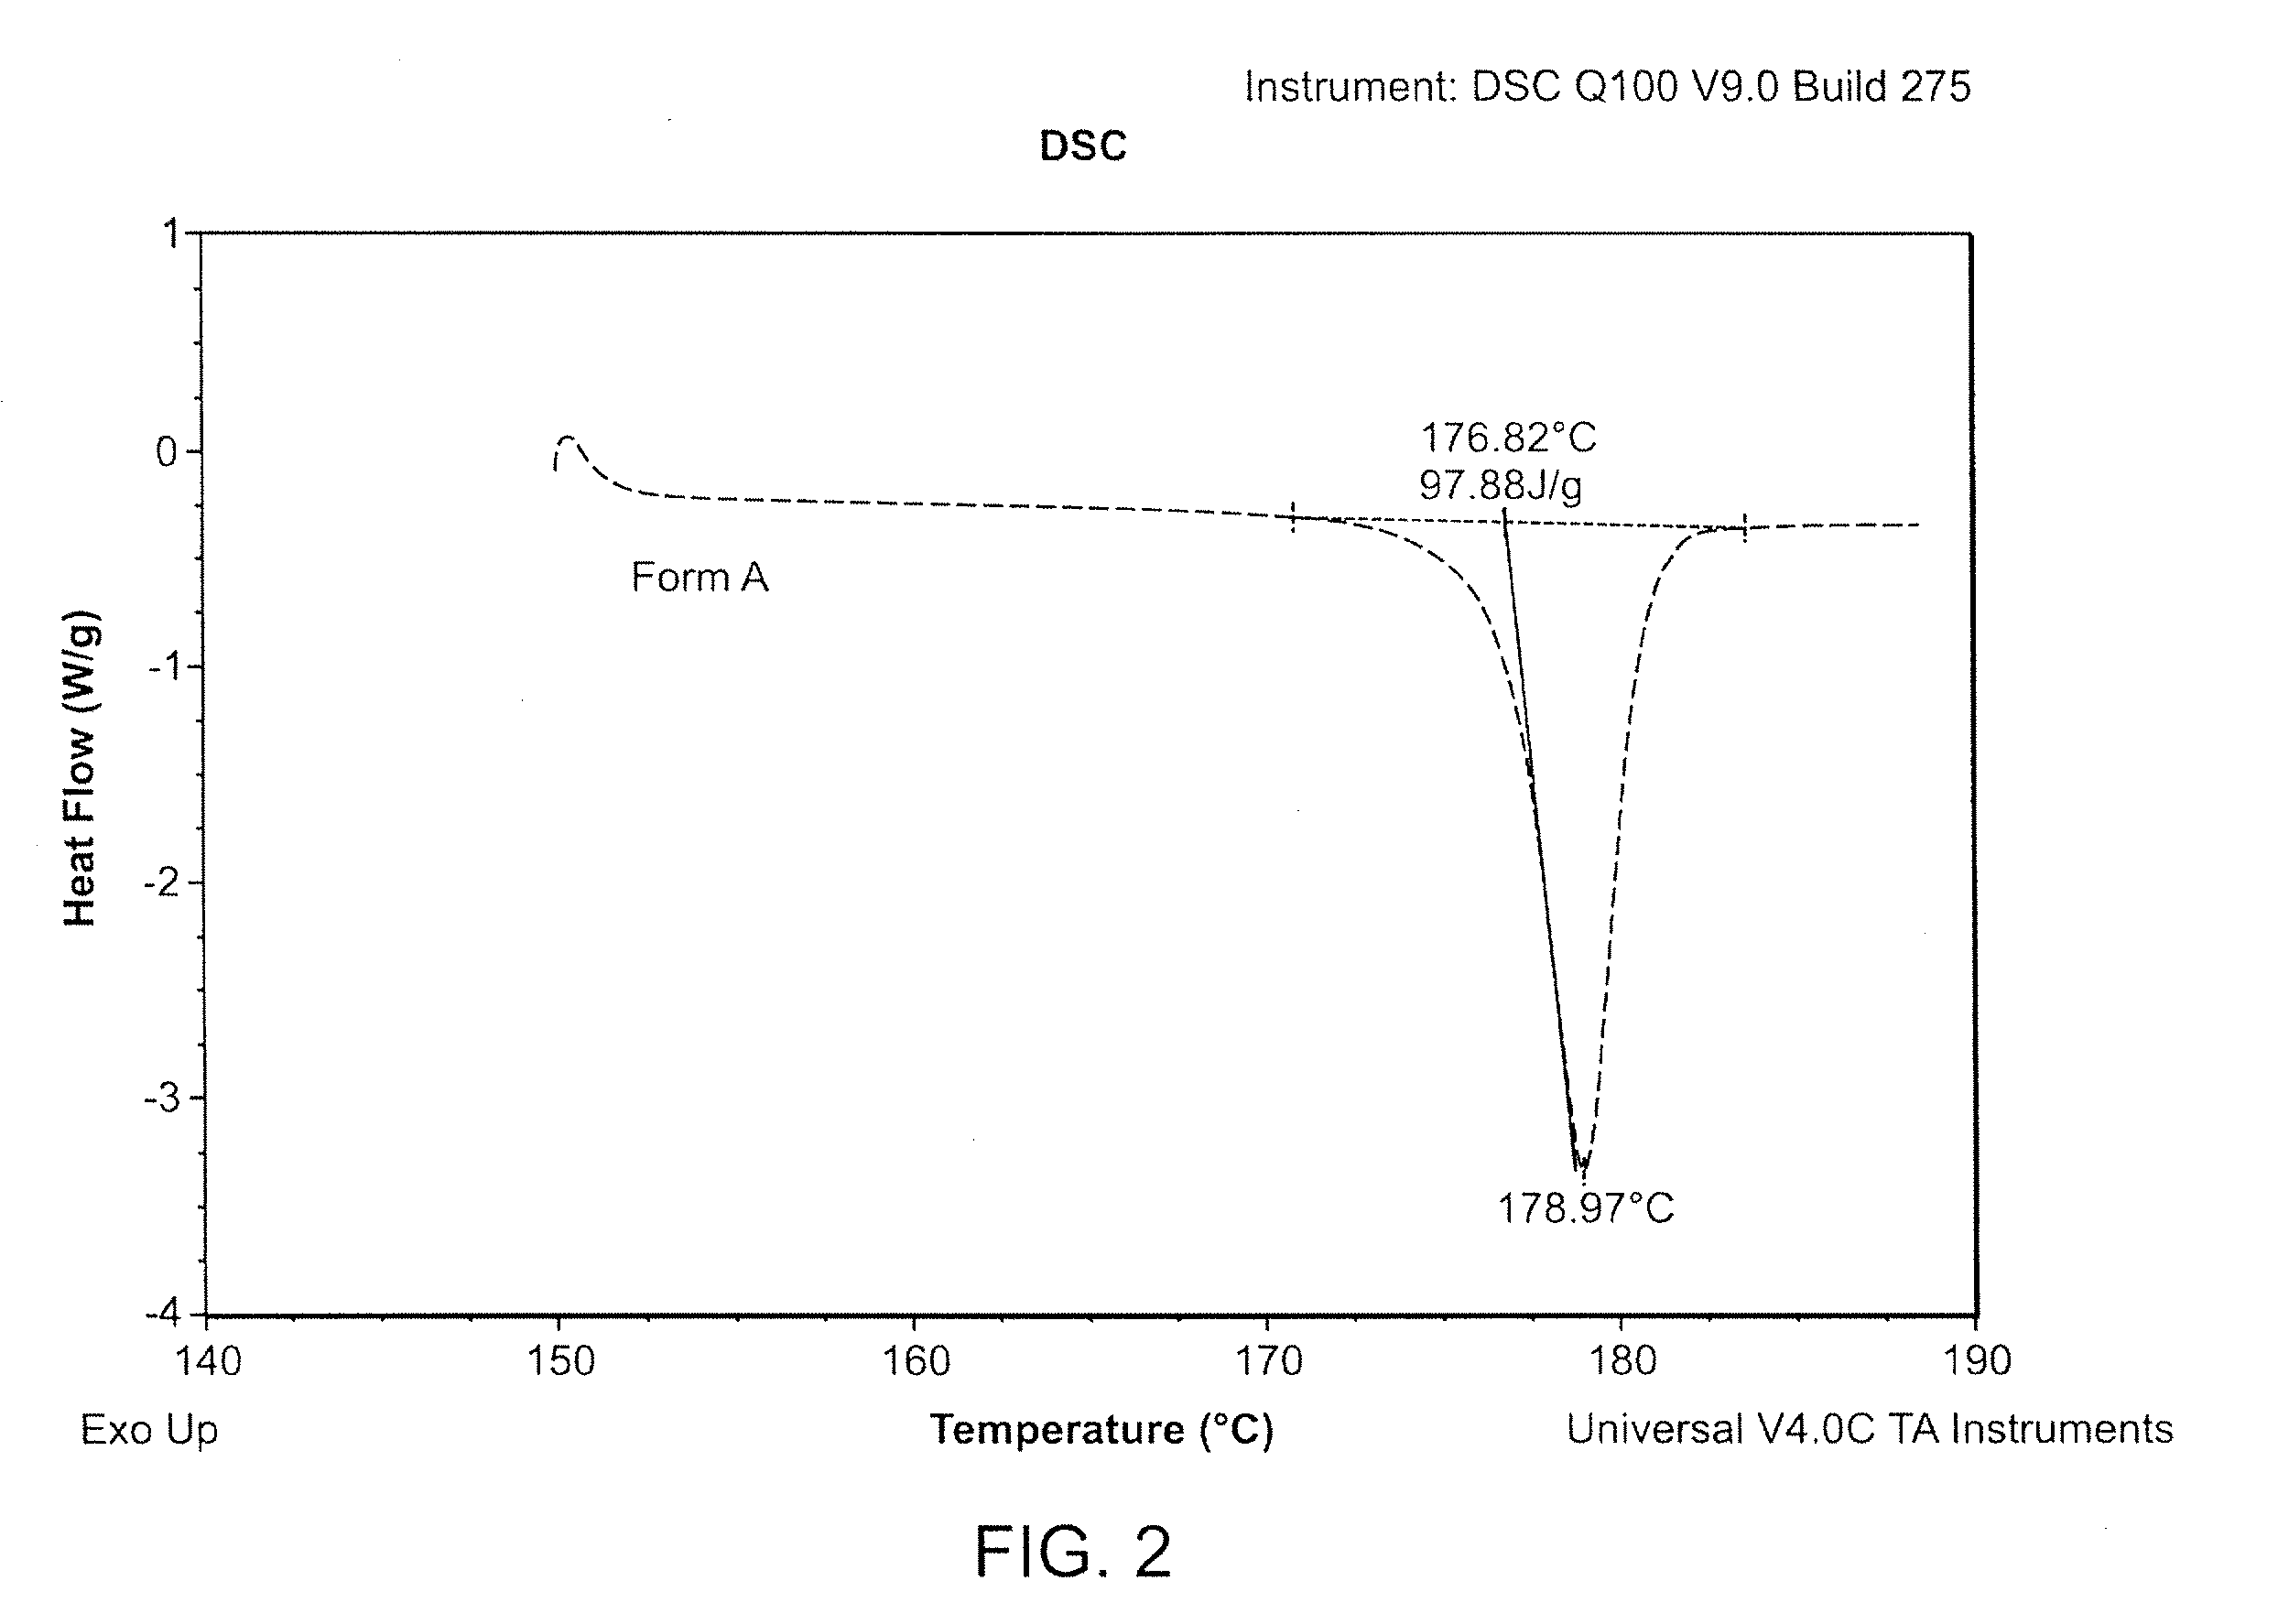 Methods of converting polymorphic form b of bazedoxifene acetate to polymorphic form a of bazedoxifene acetate